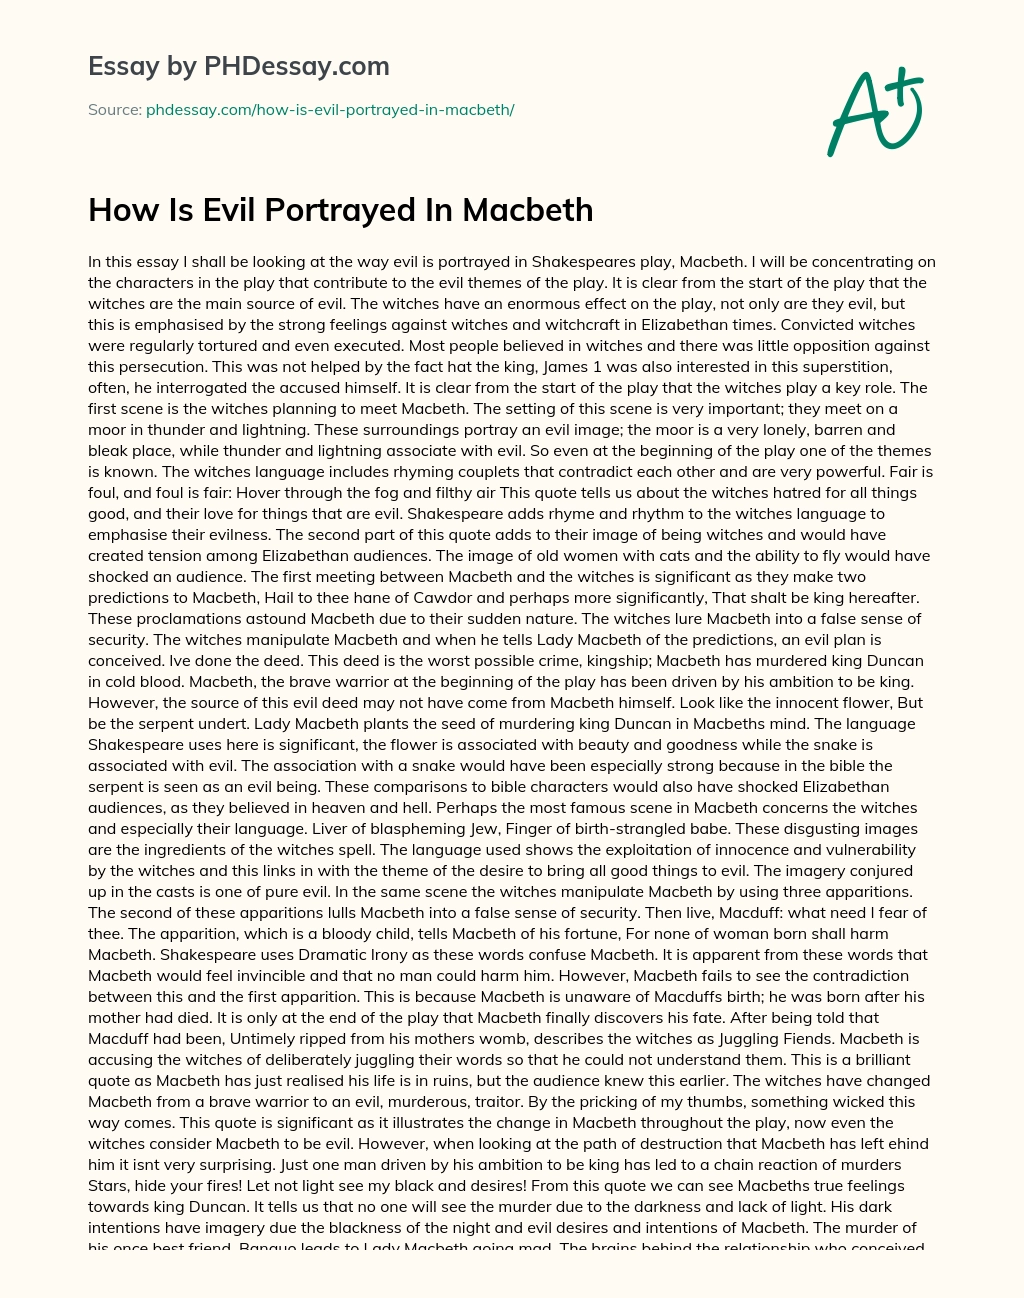 Реферат: How Is Evil Portrayed In Macbeth Essay